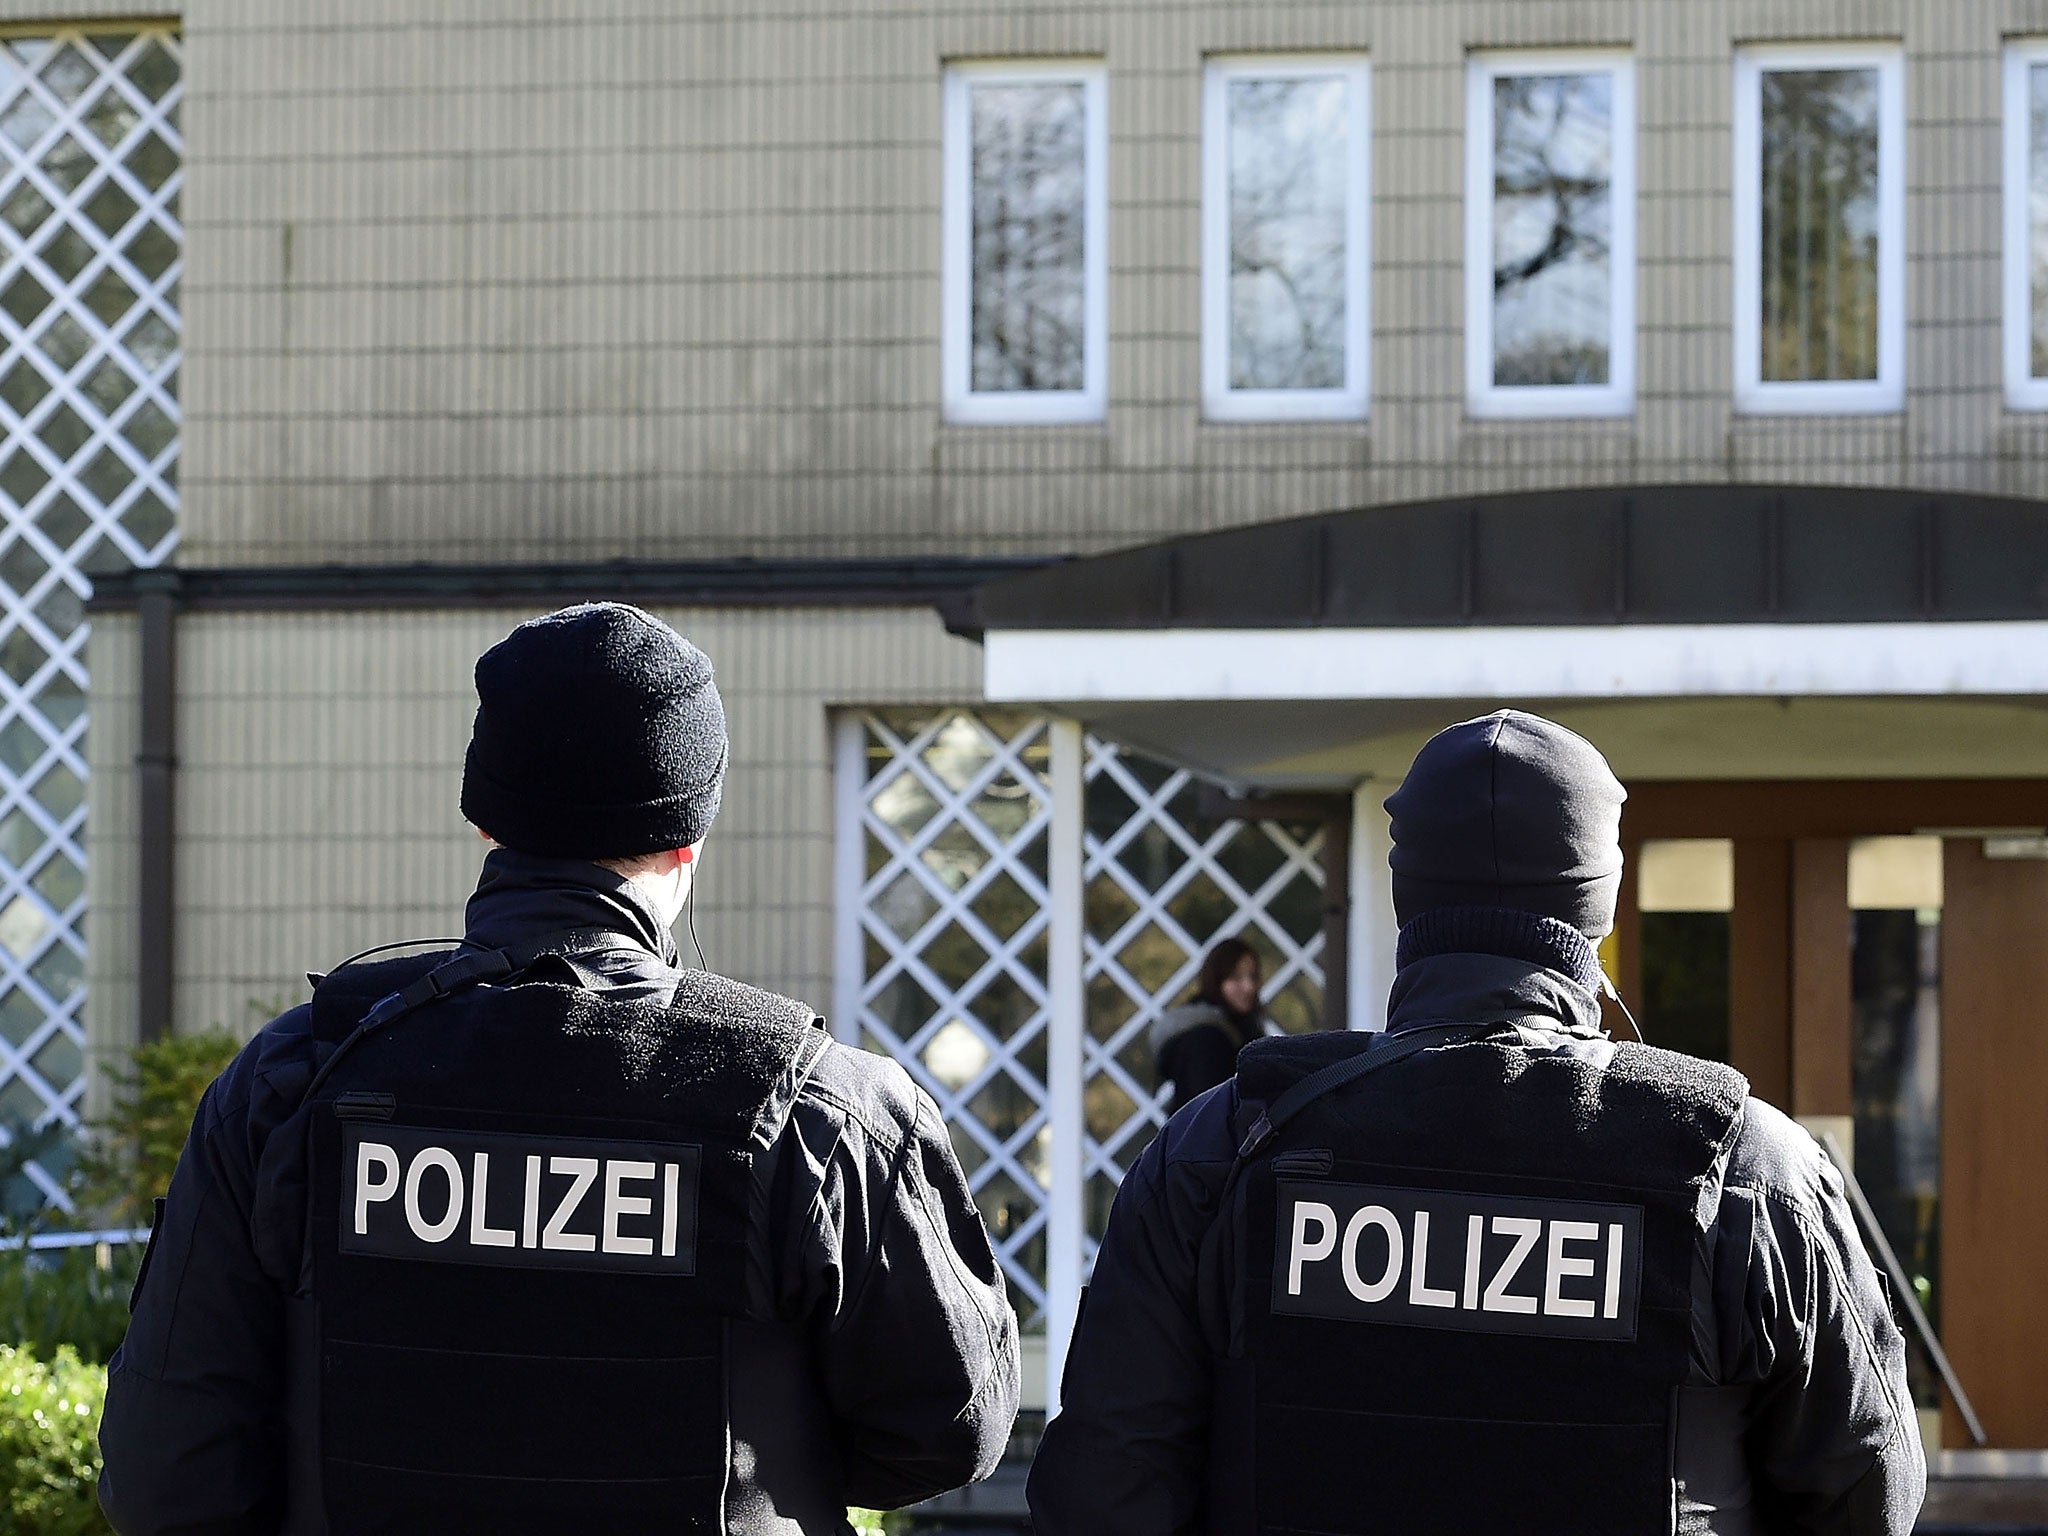 Police officers stand guard outside a synagogue in Bremen, Germany. Bremen is on high alert after authorities reported that they had concrete information about a possible terror threat